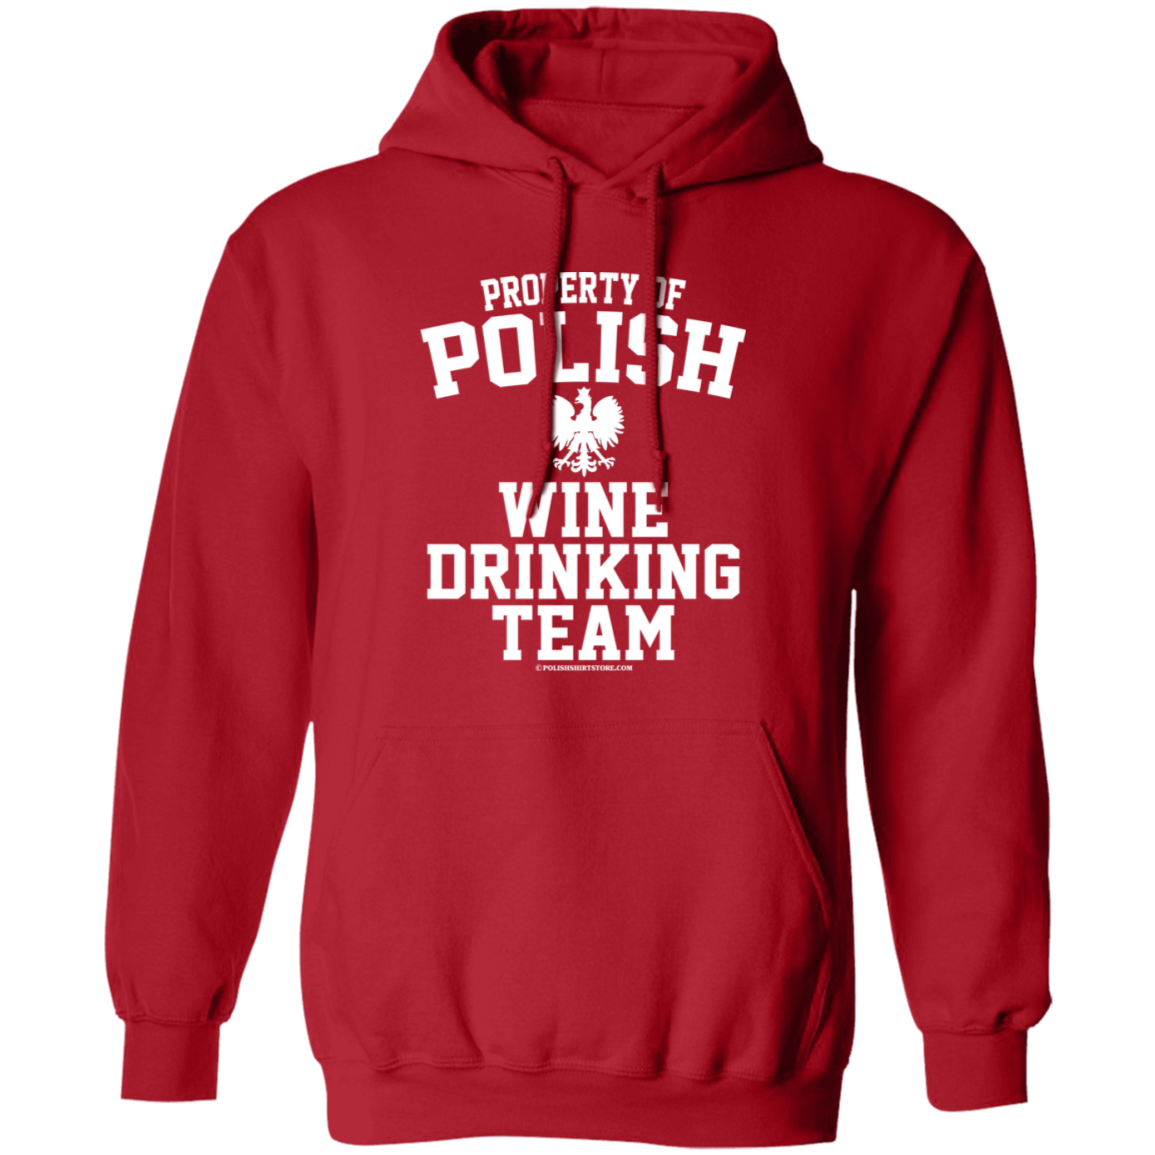 Property of Polish Wine Drinking Team Apparel CustomCat G185 Pullover Hoodie Red S